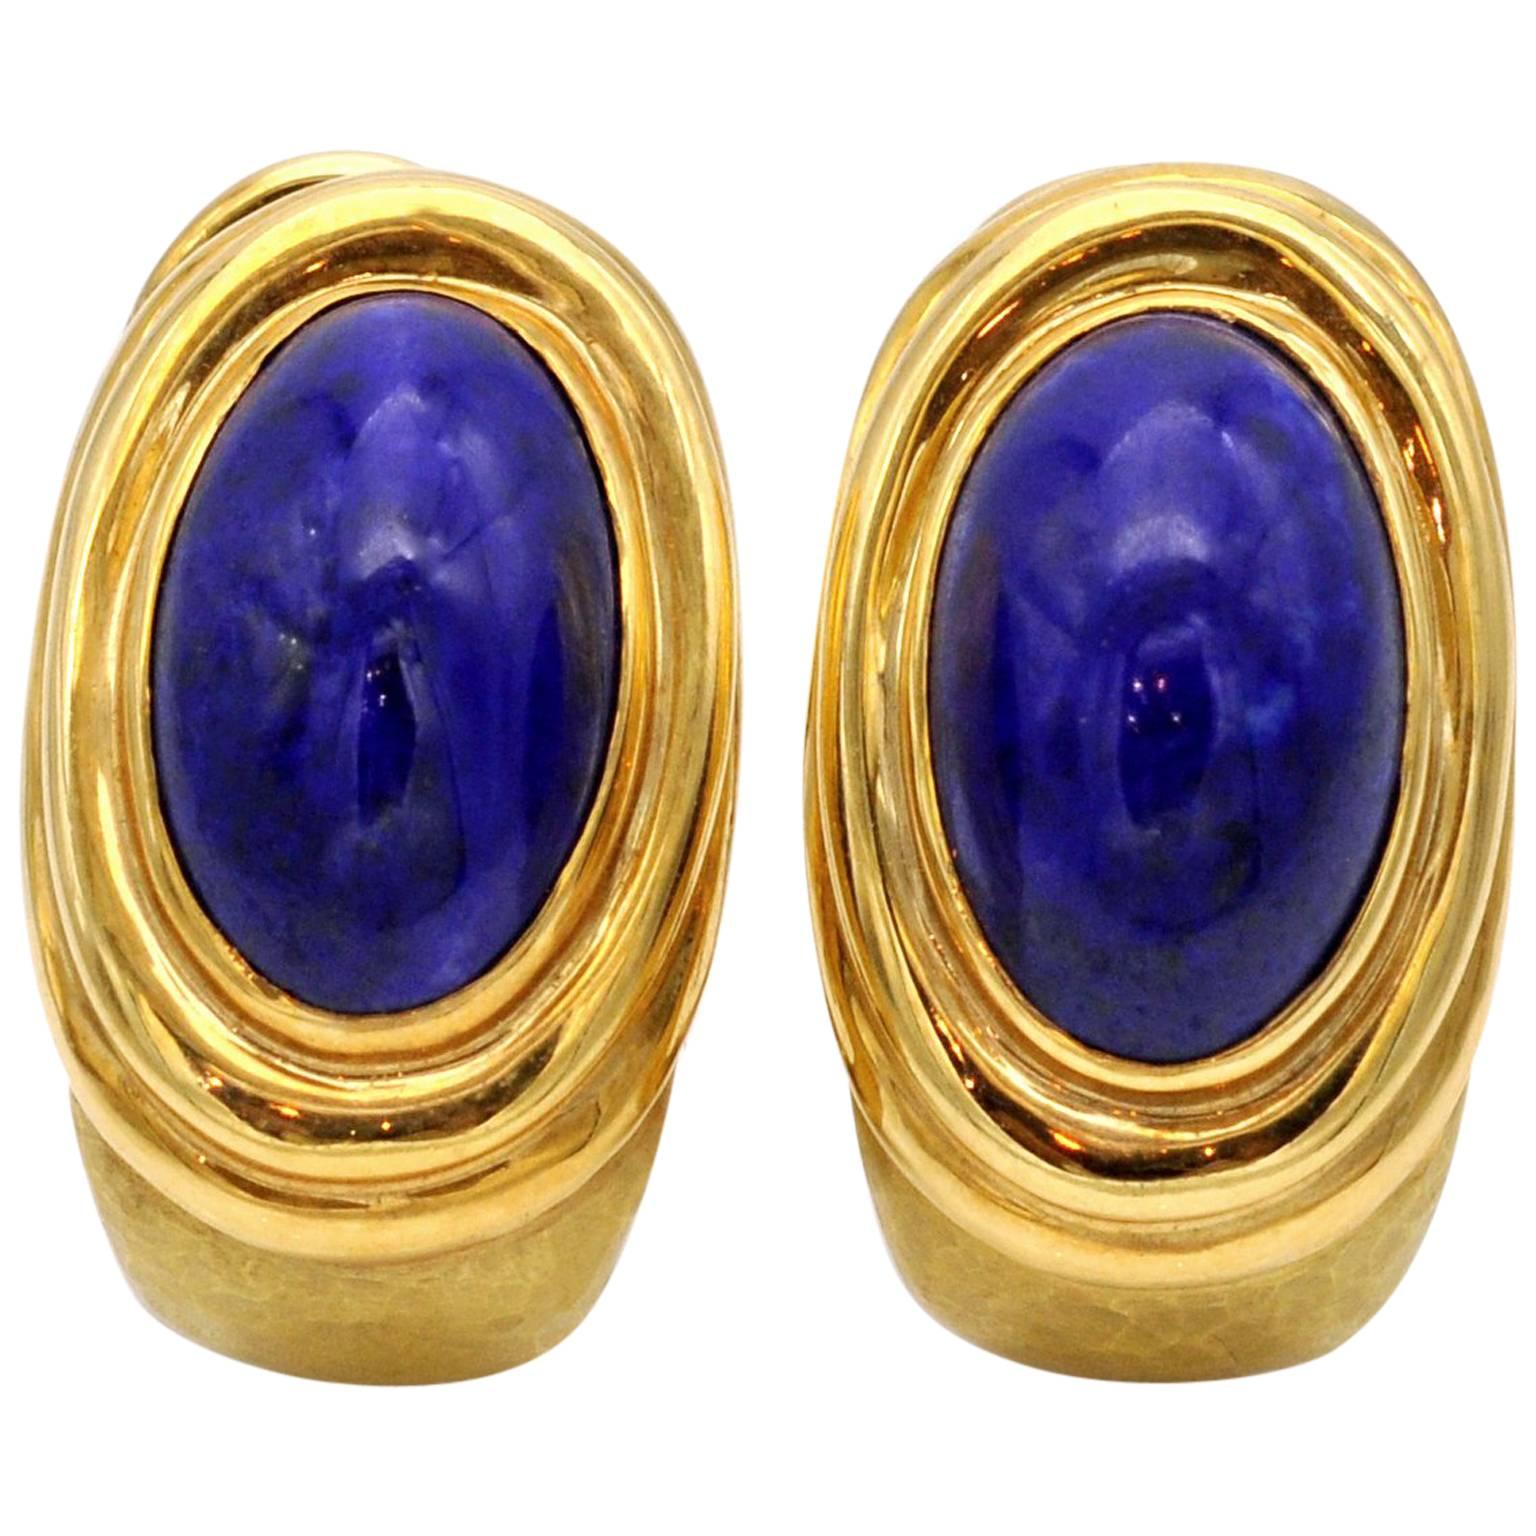 Hammered Gold and Lapis Lazuli Clip-On Earrings